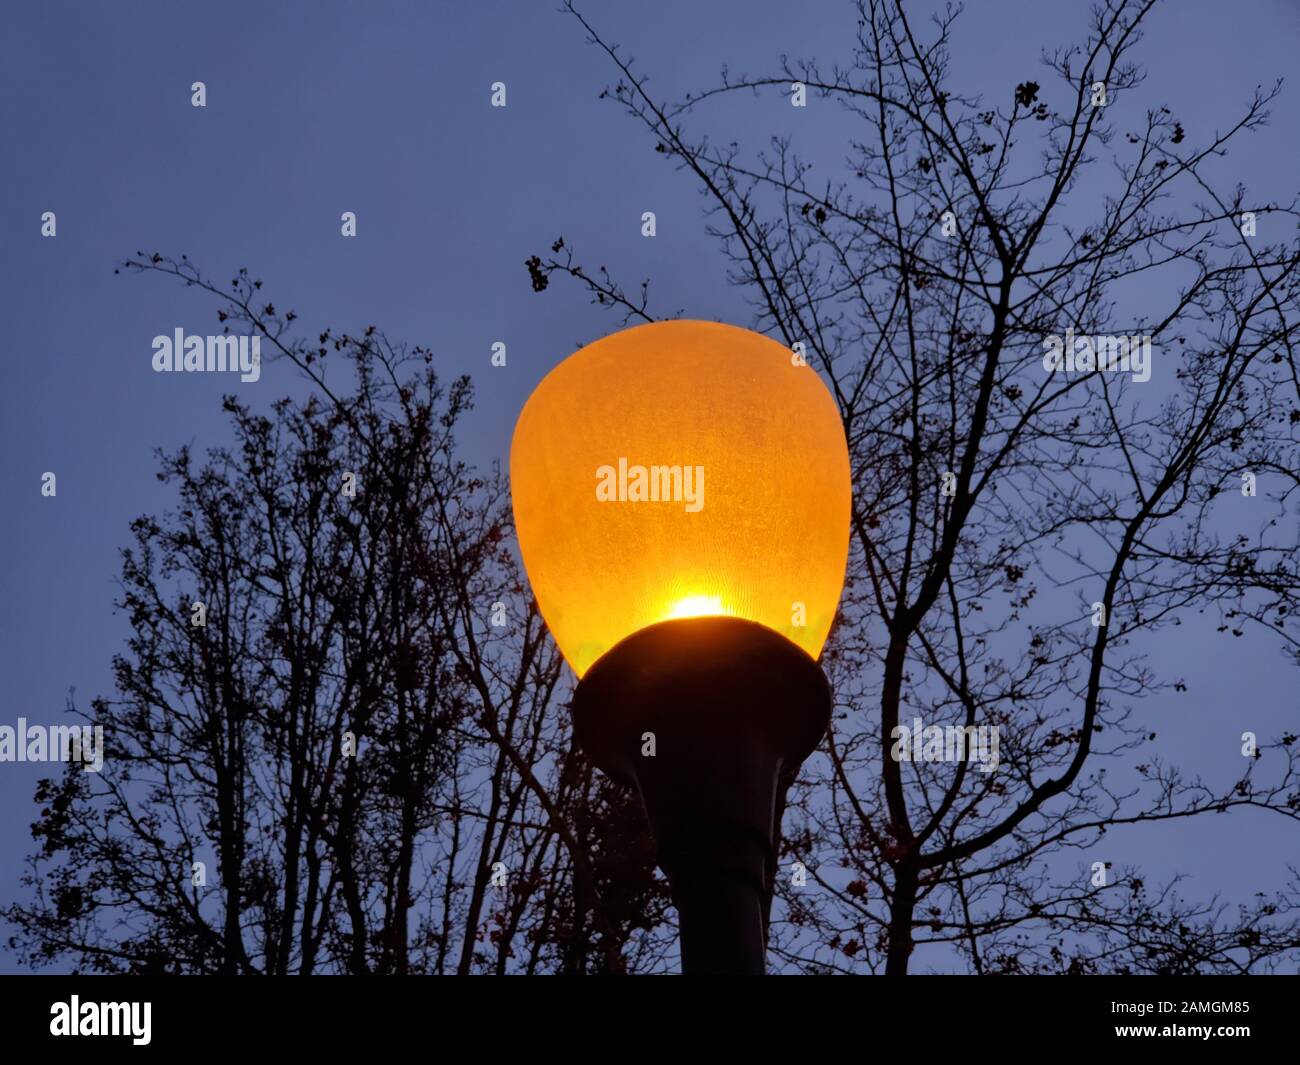 Close-up up top of street lamp, showing typical orange glow of a sodium vapor light, San Ramon, California, December 18, 2019. As more areas switch to LED street lighting, the color temperature of nightime lights is increasing, from the dark yellow of sodium vapor lamps to the bright white of LEDs. () Stock Photo